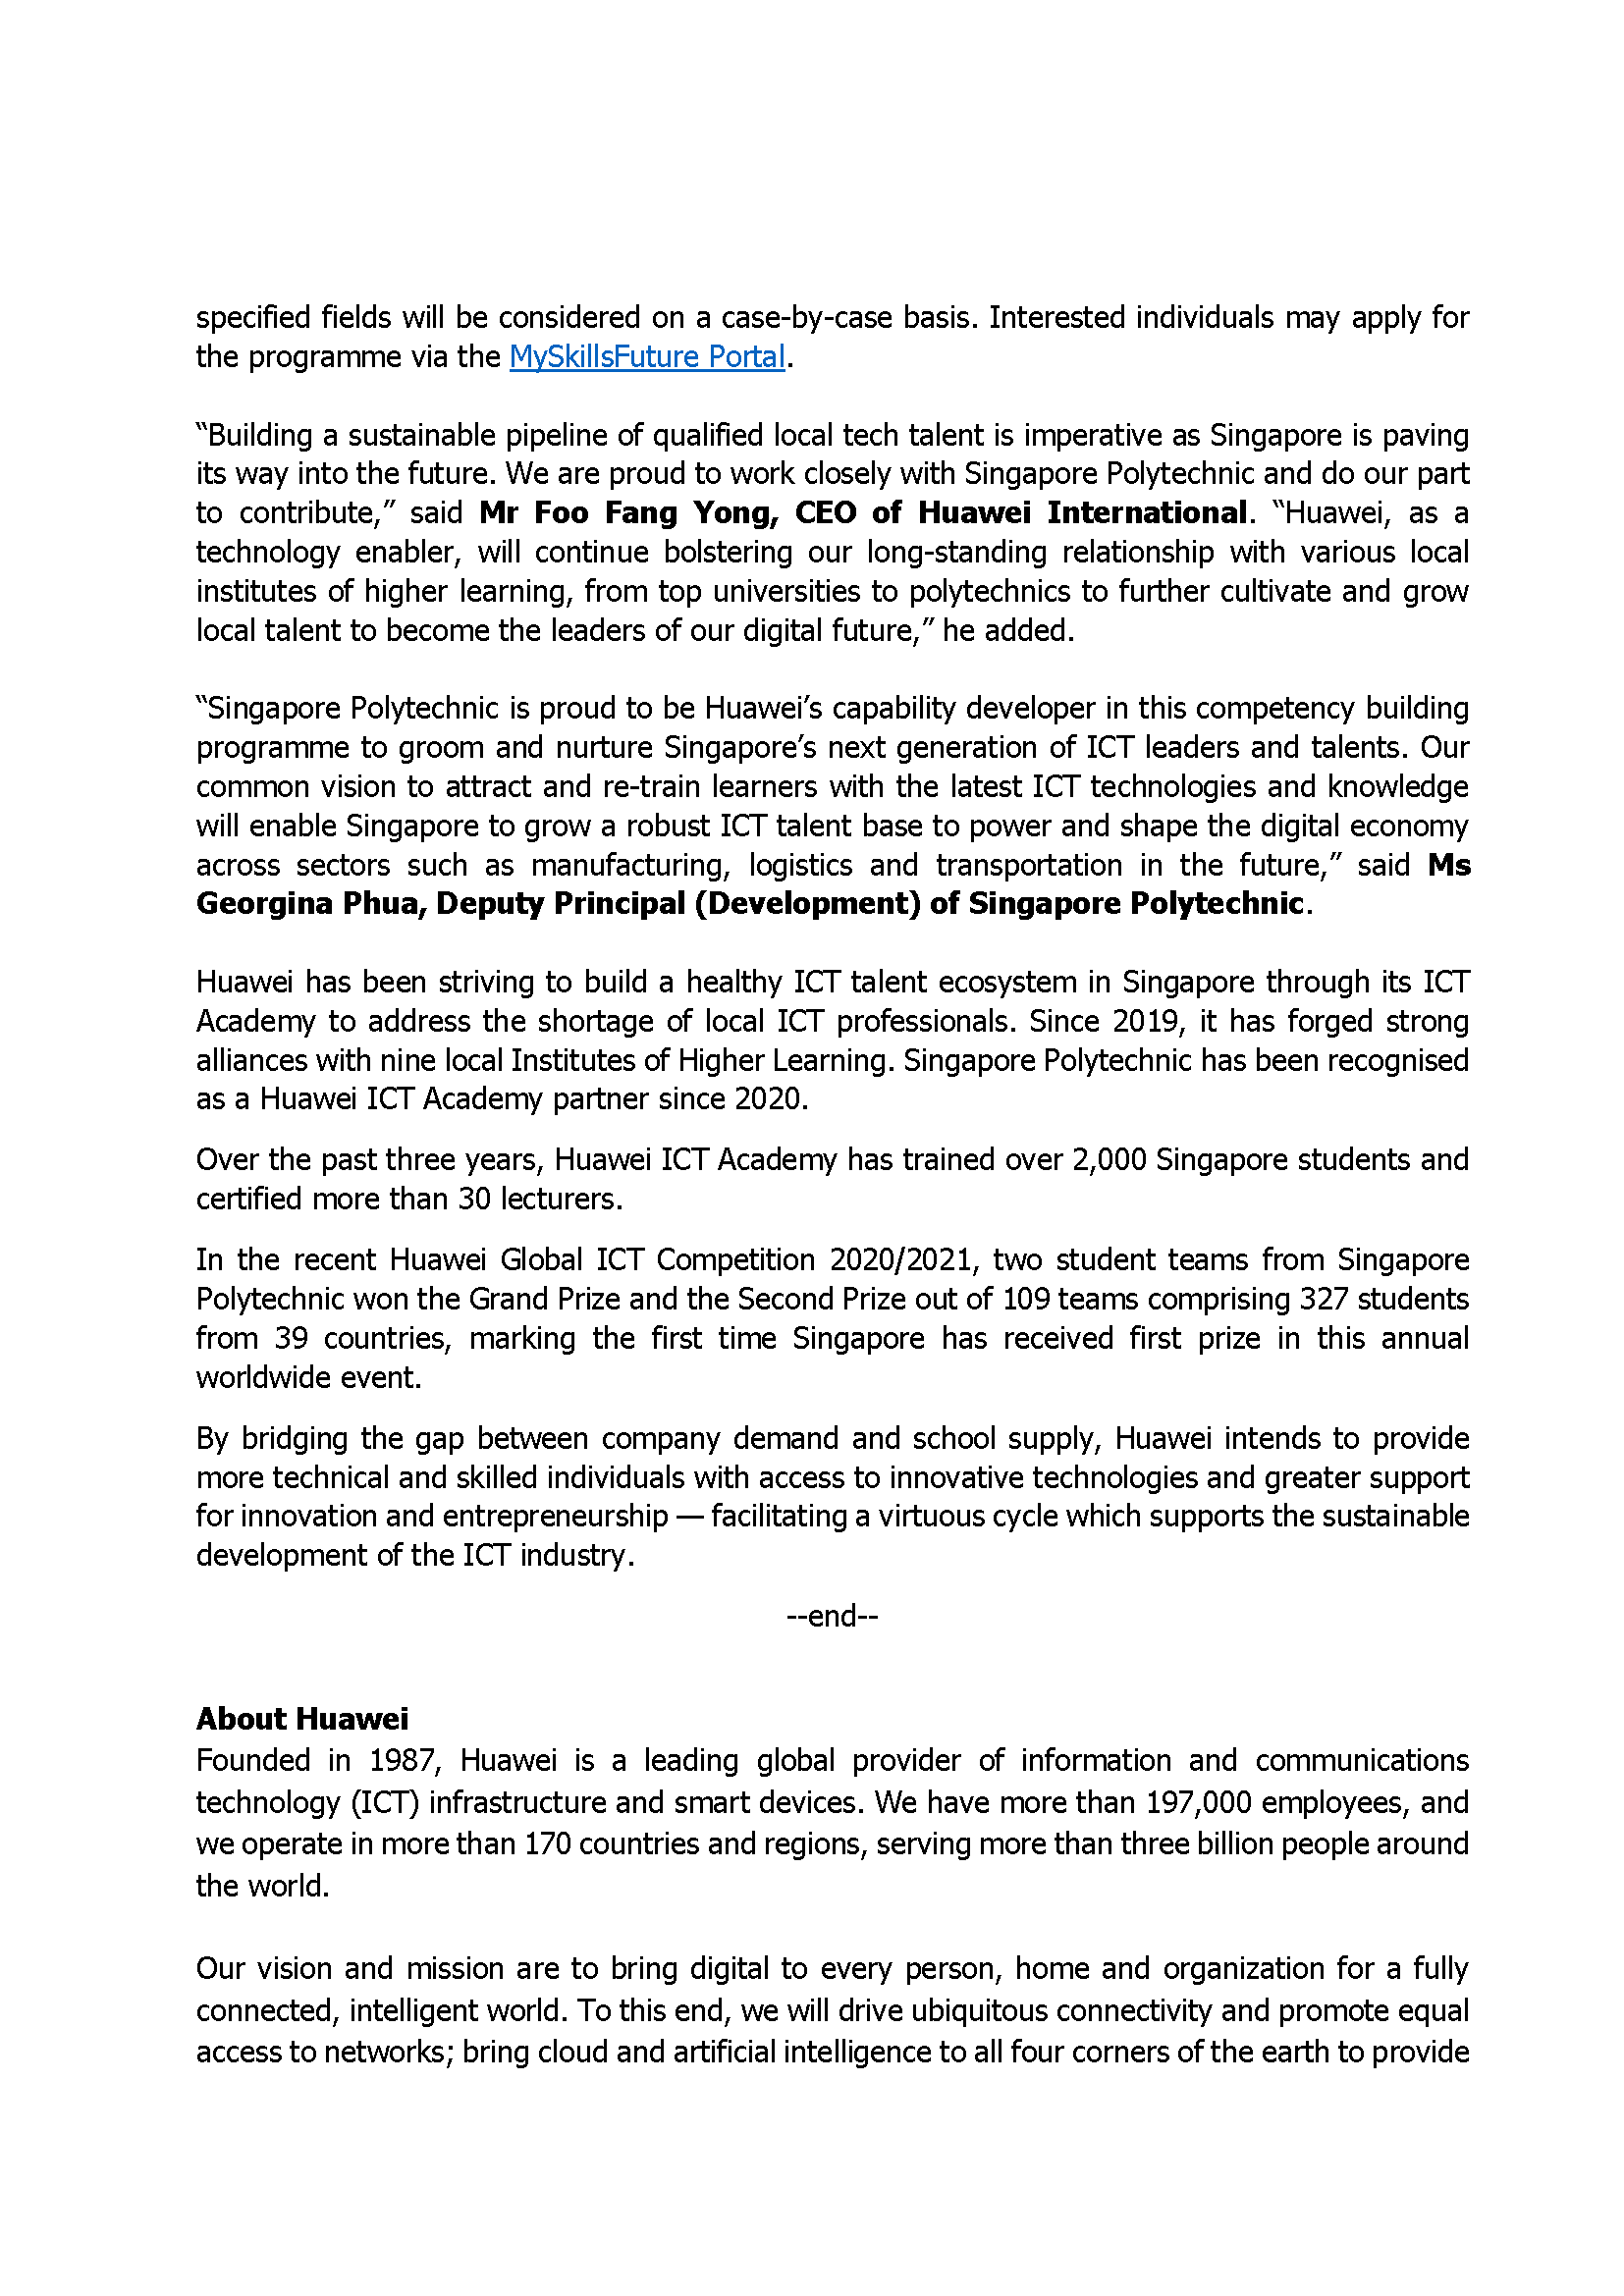 Press Release - Huawei and Singapore Polytechnic Launch AI and Cloud Services Programme to upskill and enhance employability for Singaporeans_19052022_Page_2